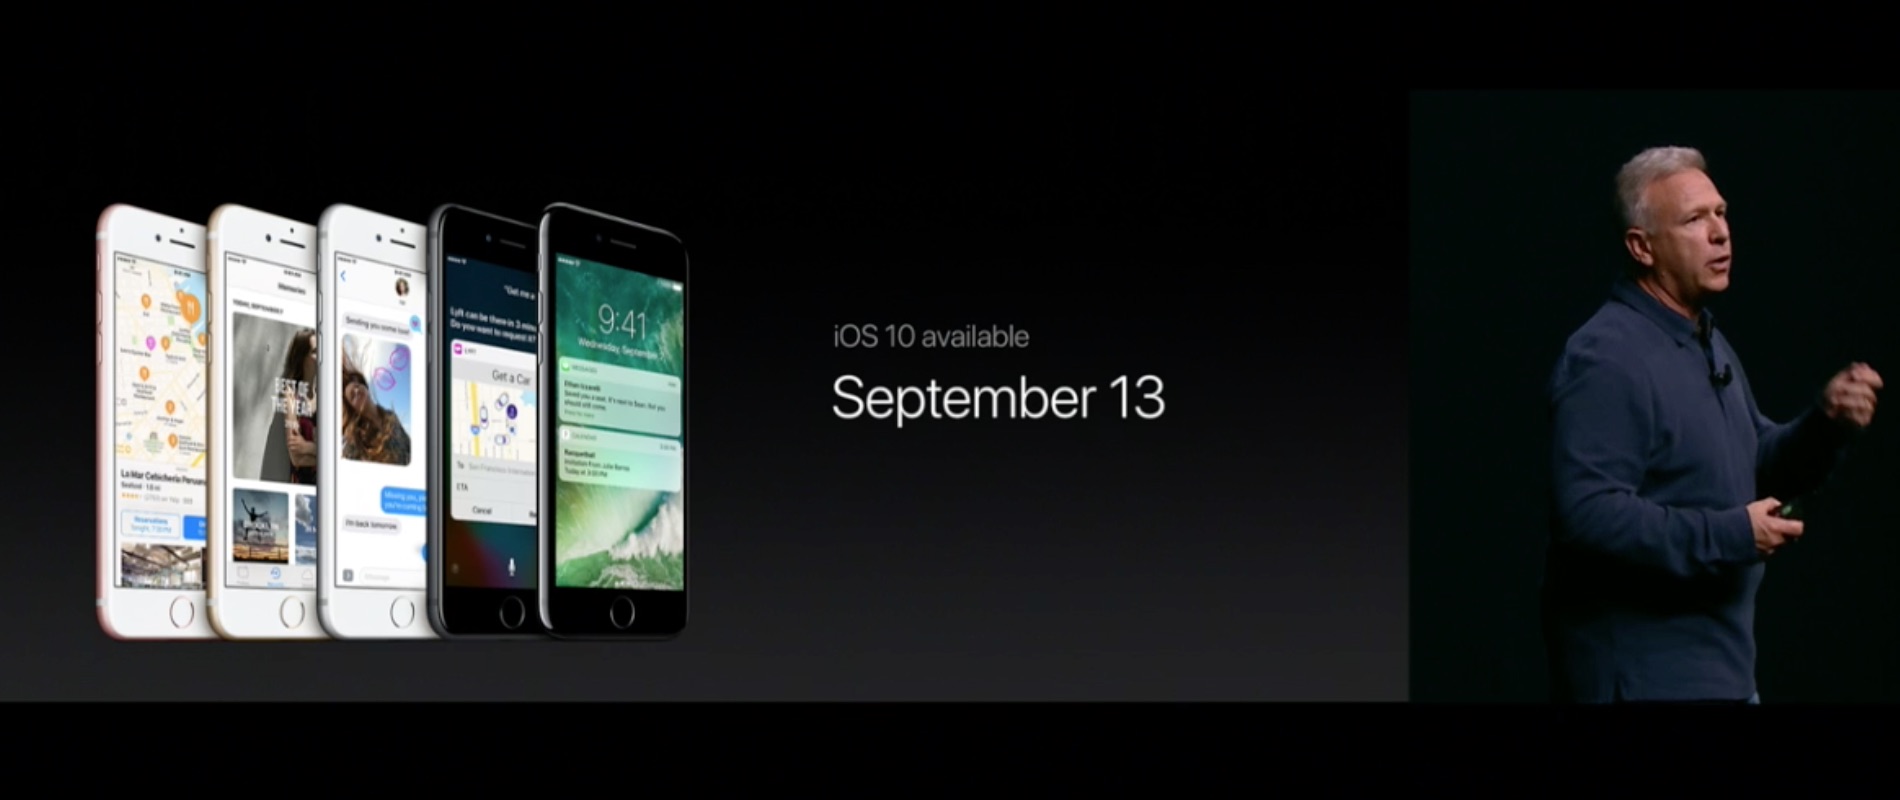 iphone7-plus-special-events-2016-sep-43